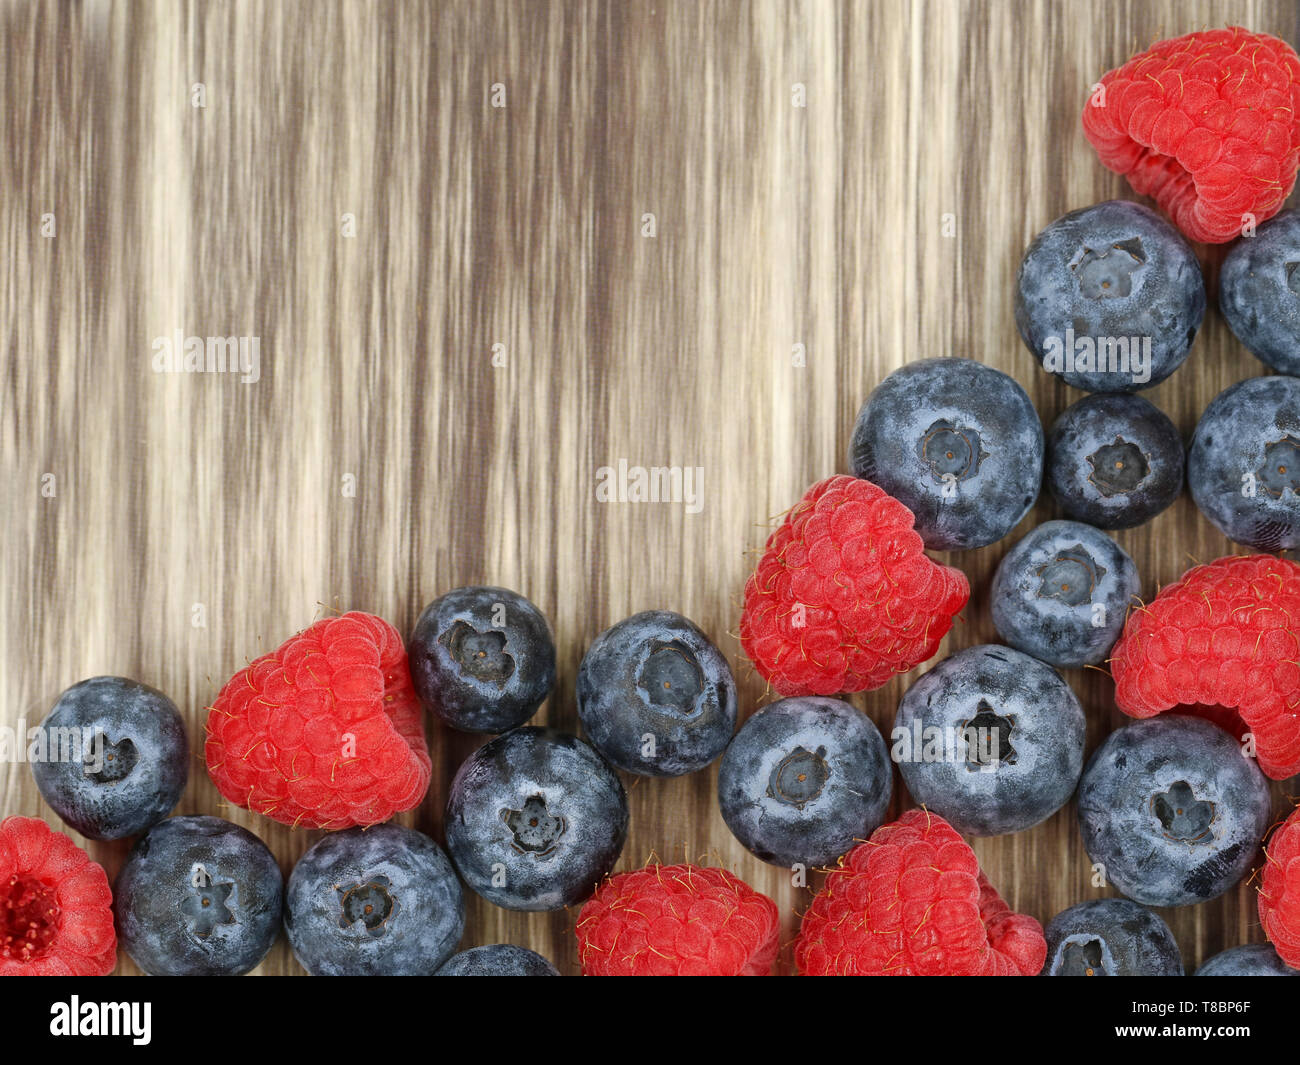 top view of raspberries and blueberries on wooden background with copy space, close-up Stock Photo